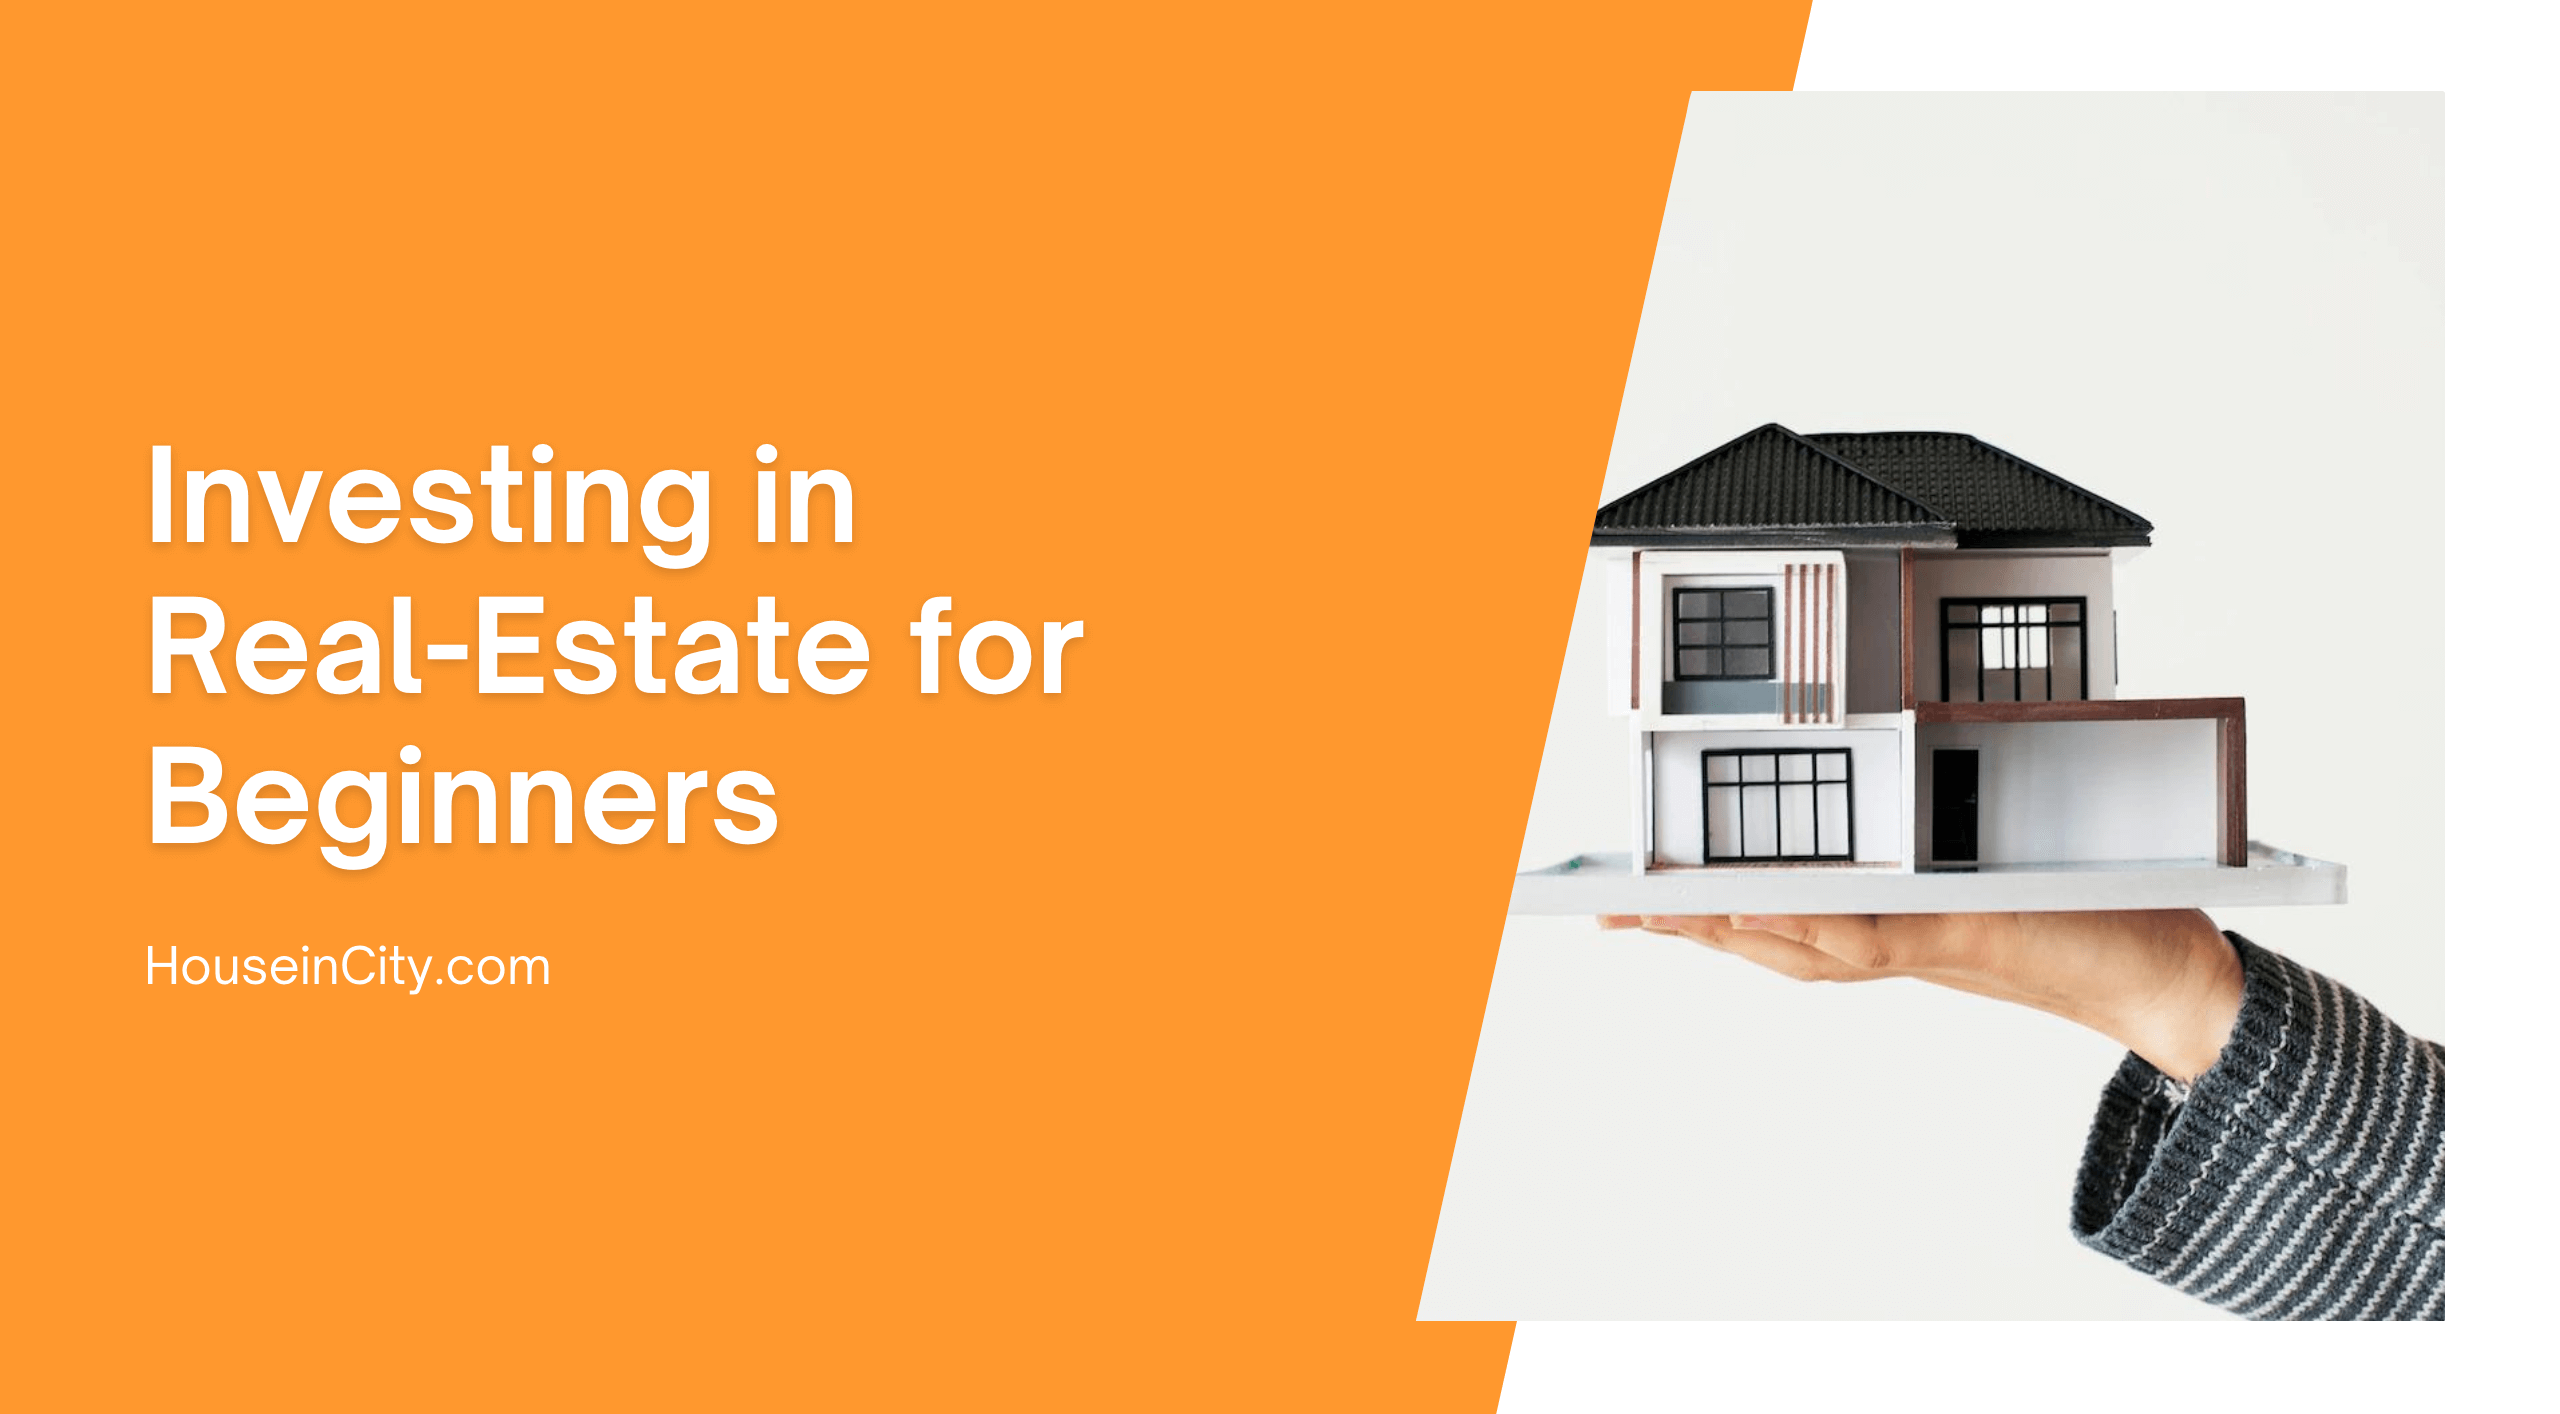 Investing in Real-Estate for Beginners